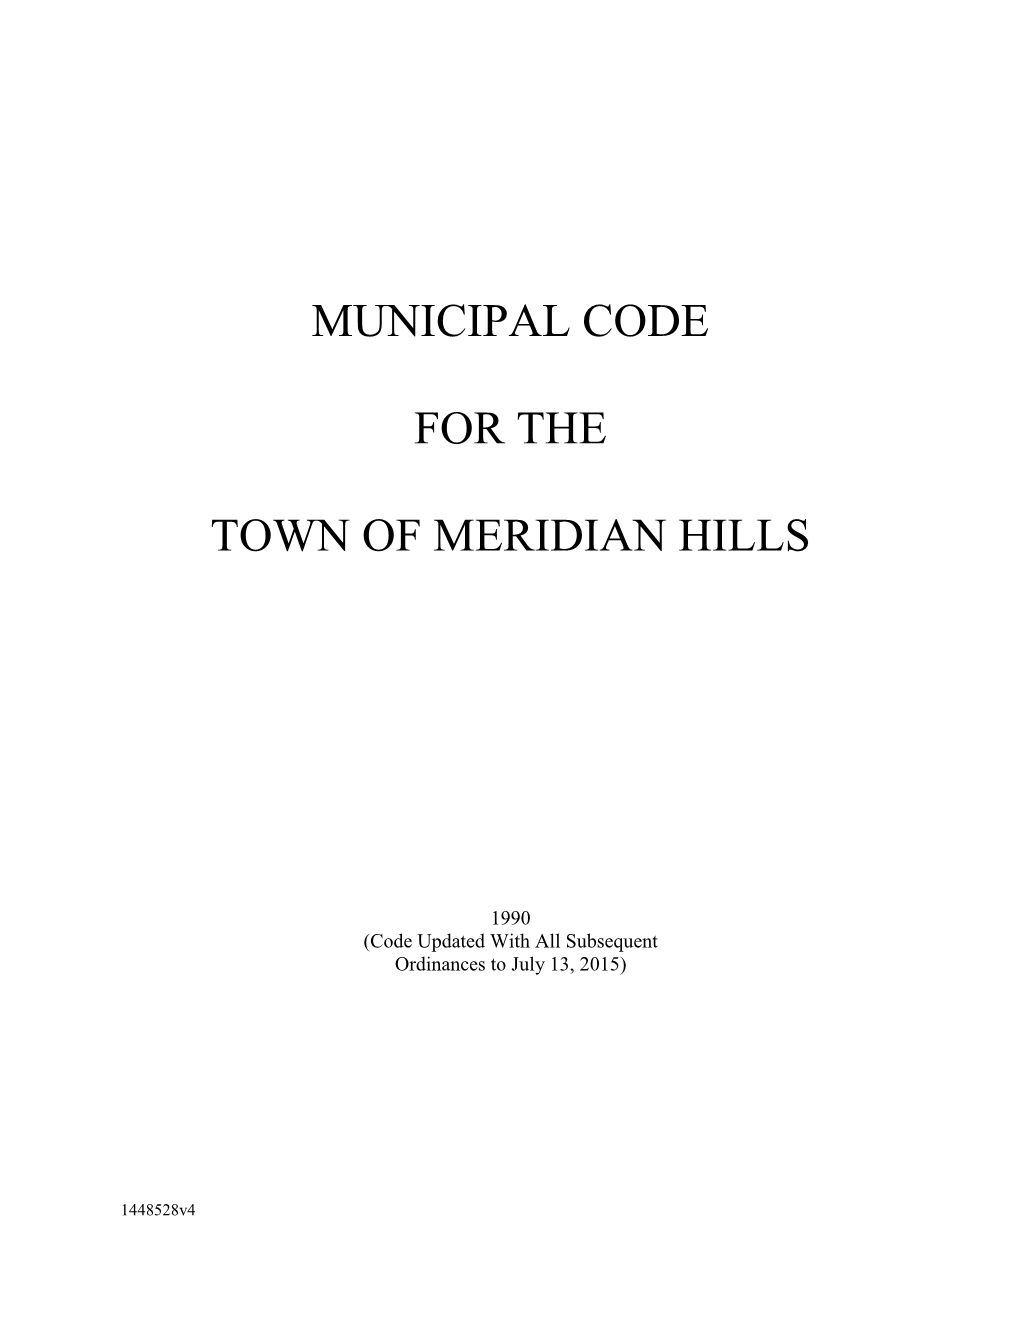 Municipal Code for the Town of Meridian Hills